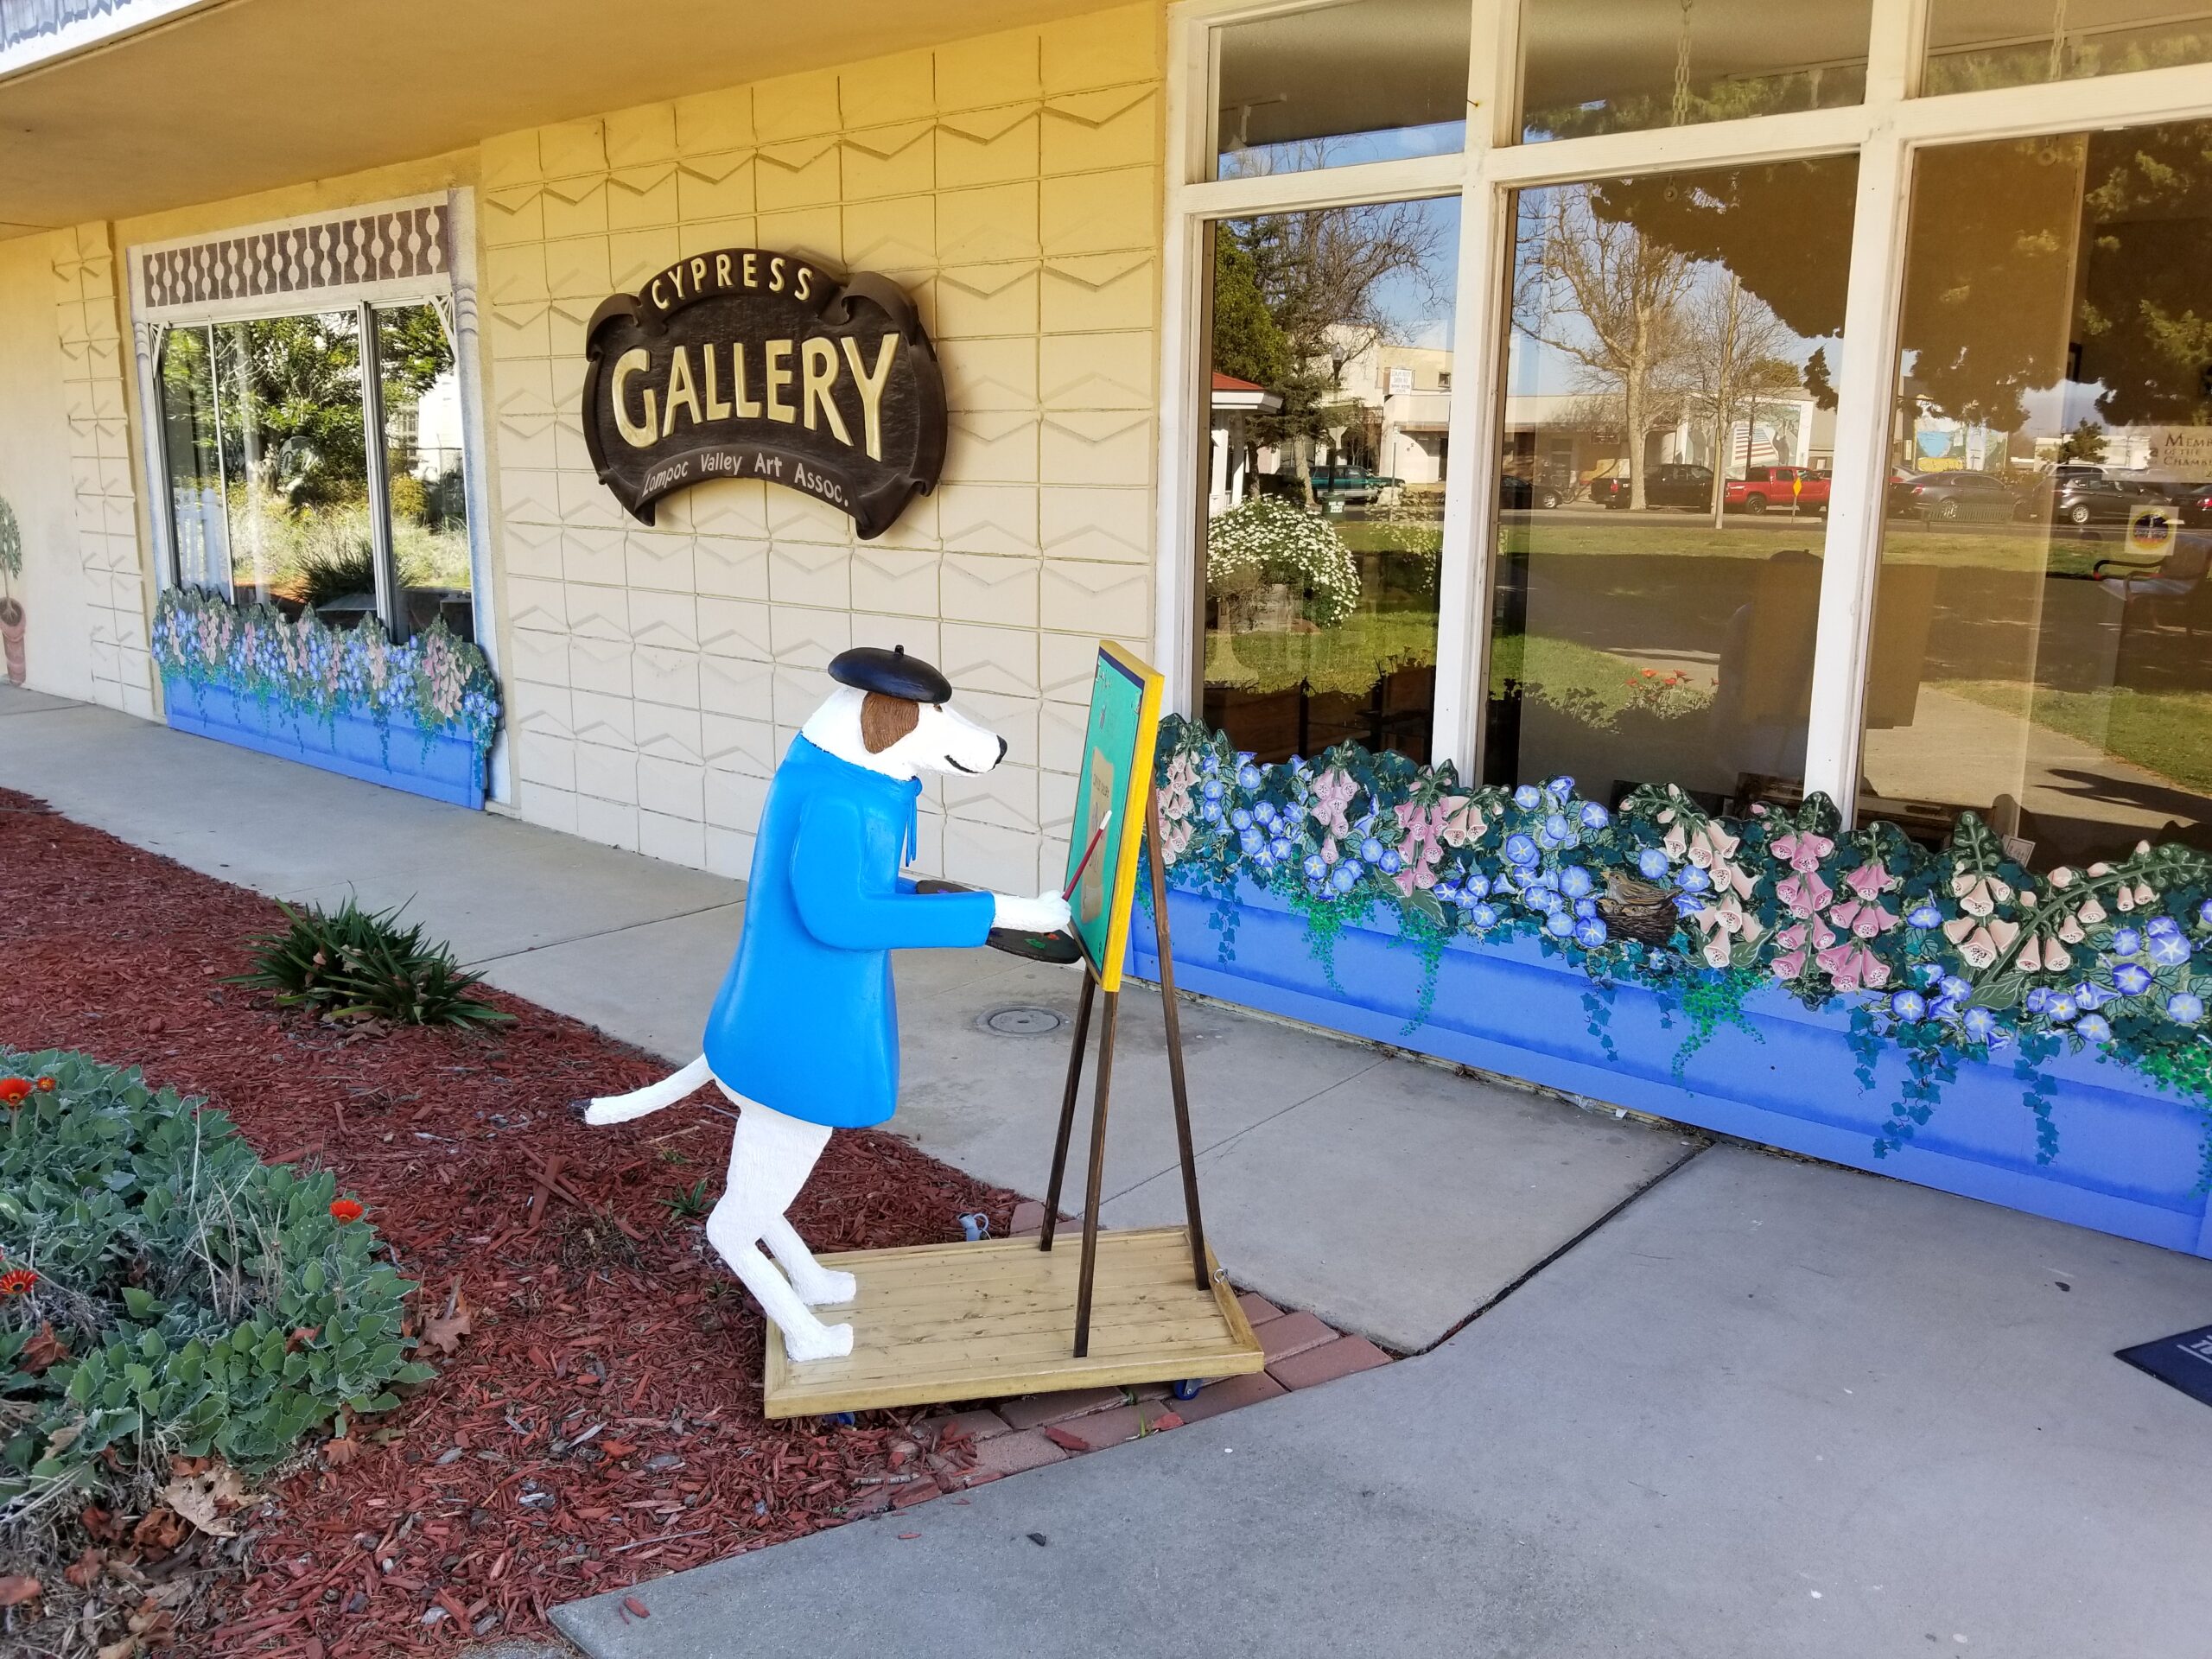 The Cypress Gallery in Lompoc CA